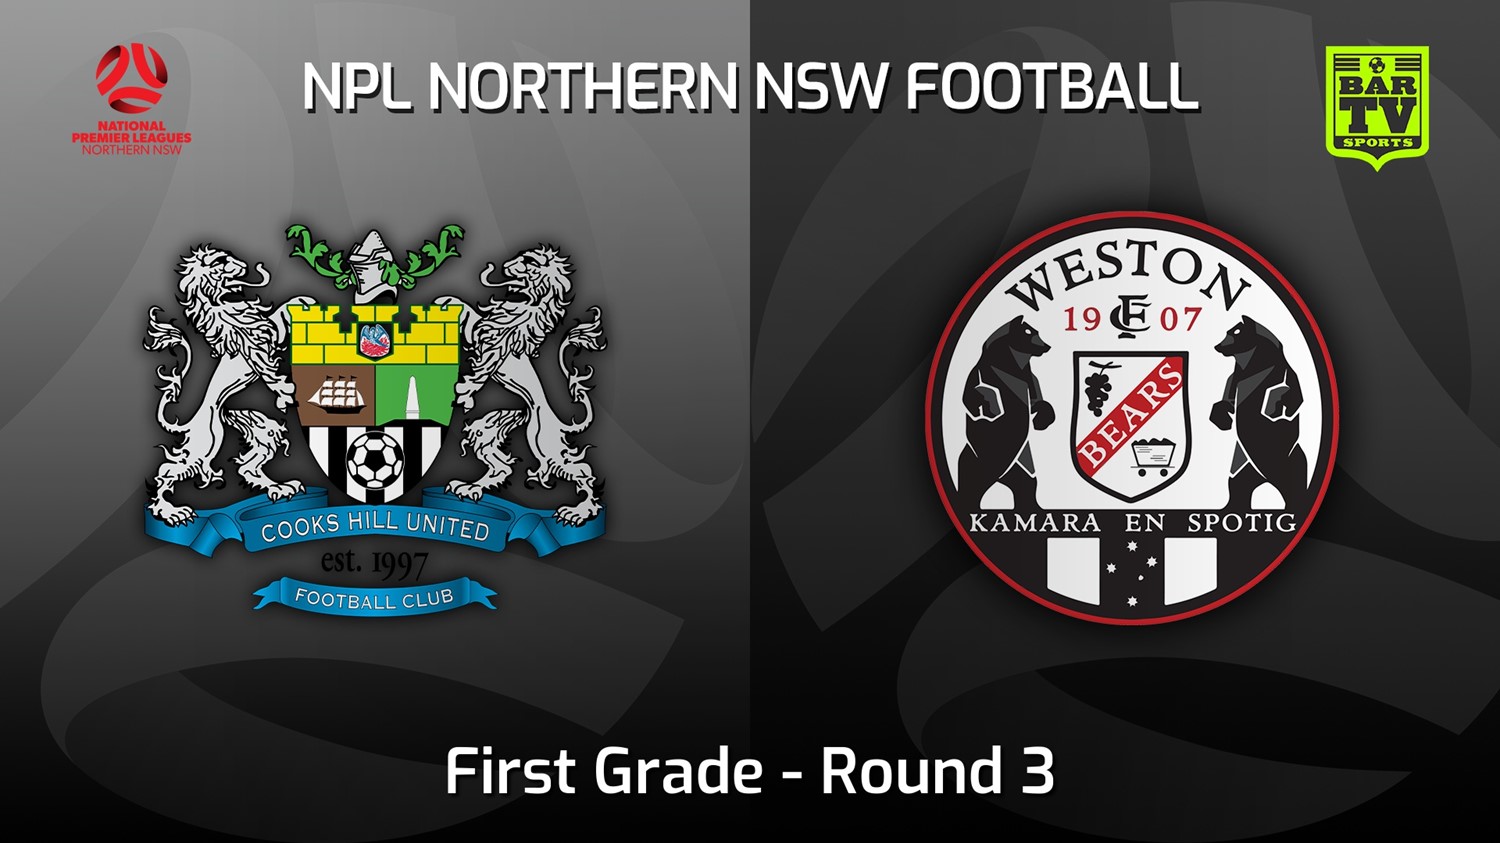 220319-NNSW NPL Round 3 - Cooks Hill United FC v Weston Workers FC Minigame Slate Image